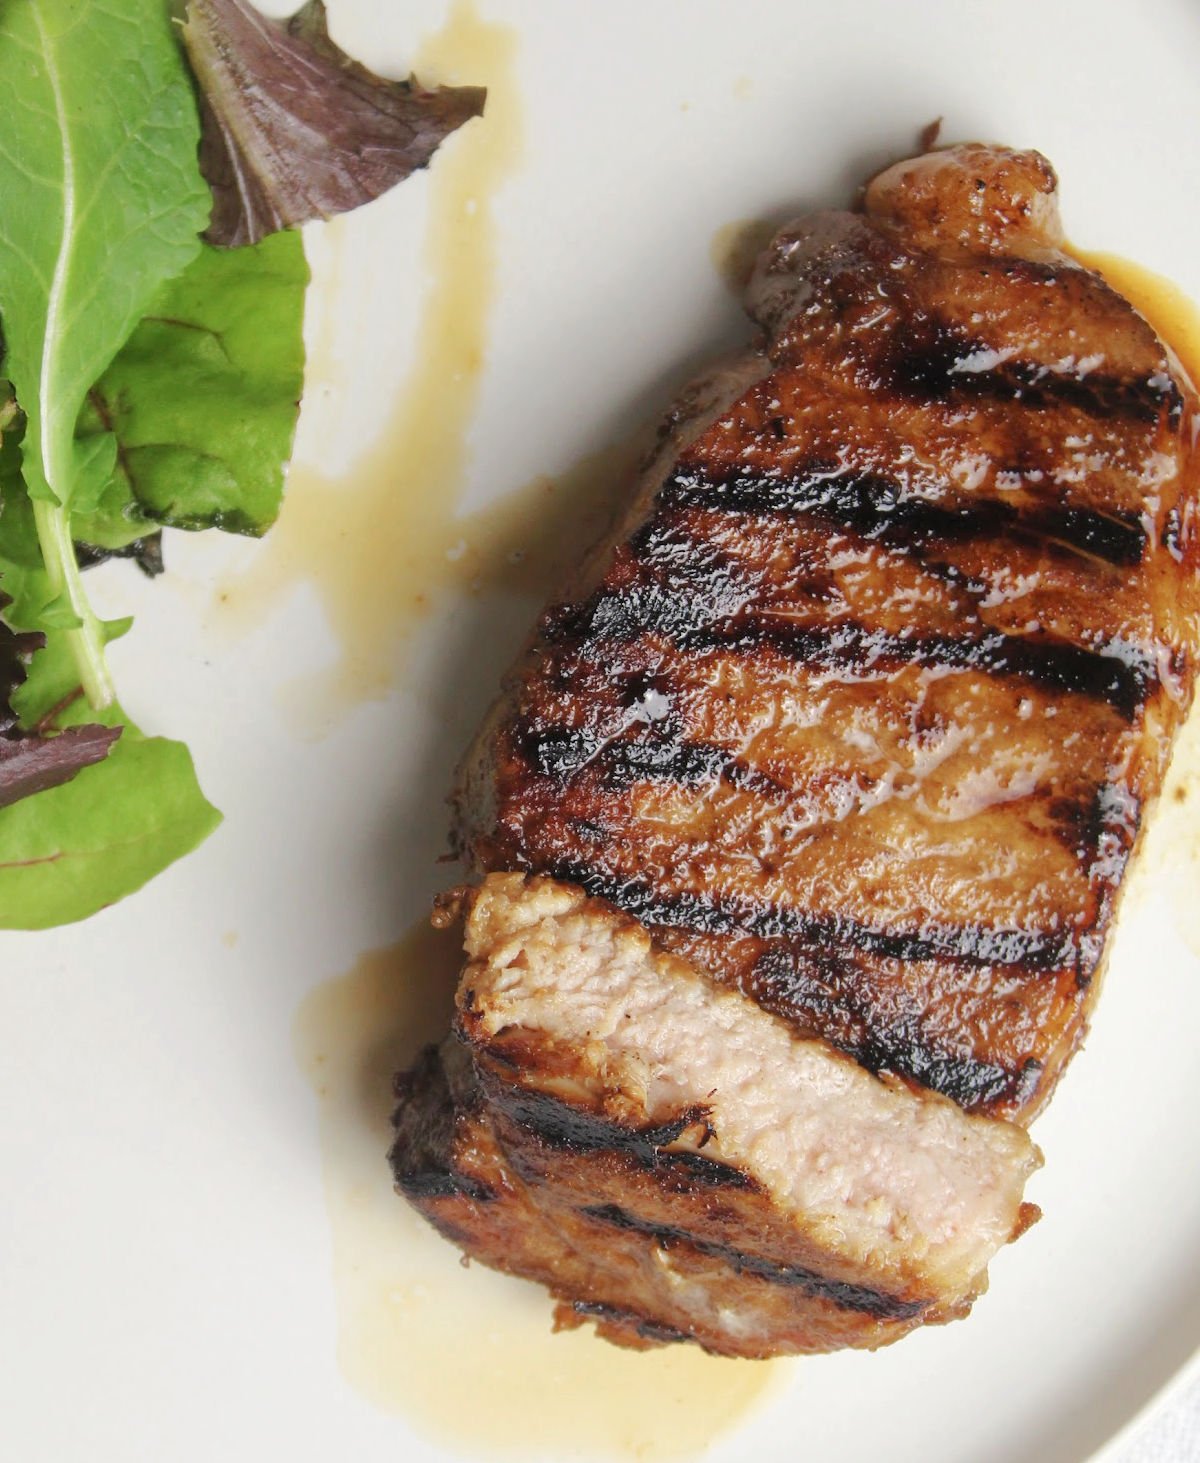 a center cut pork chop with grill marks and juices coming out of the meat on a white plate with a salad beside it.